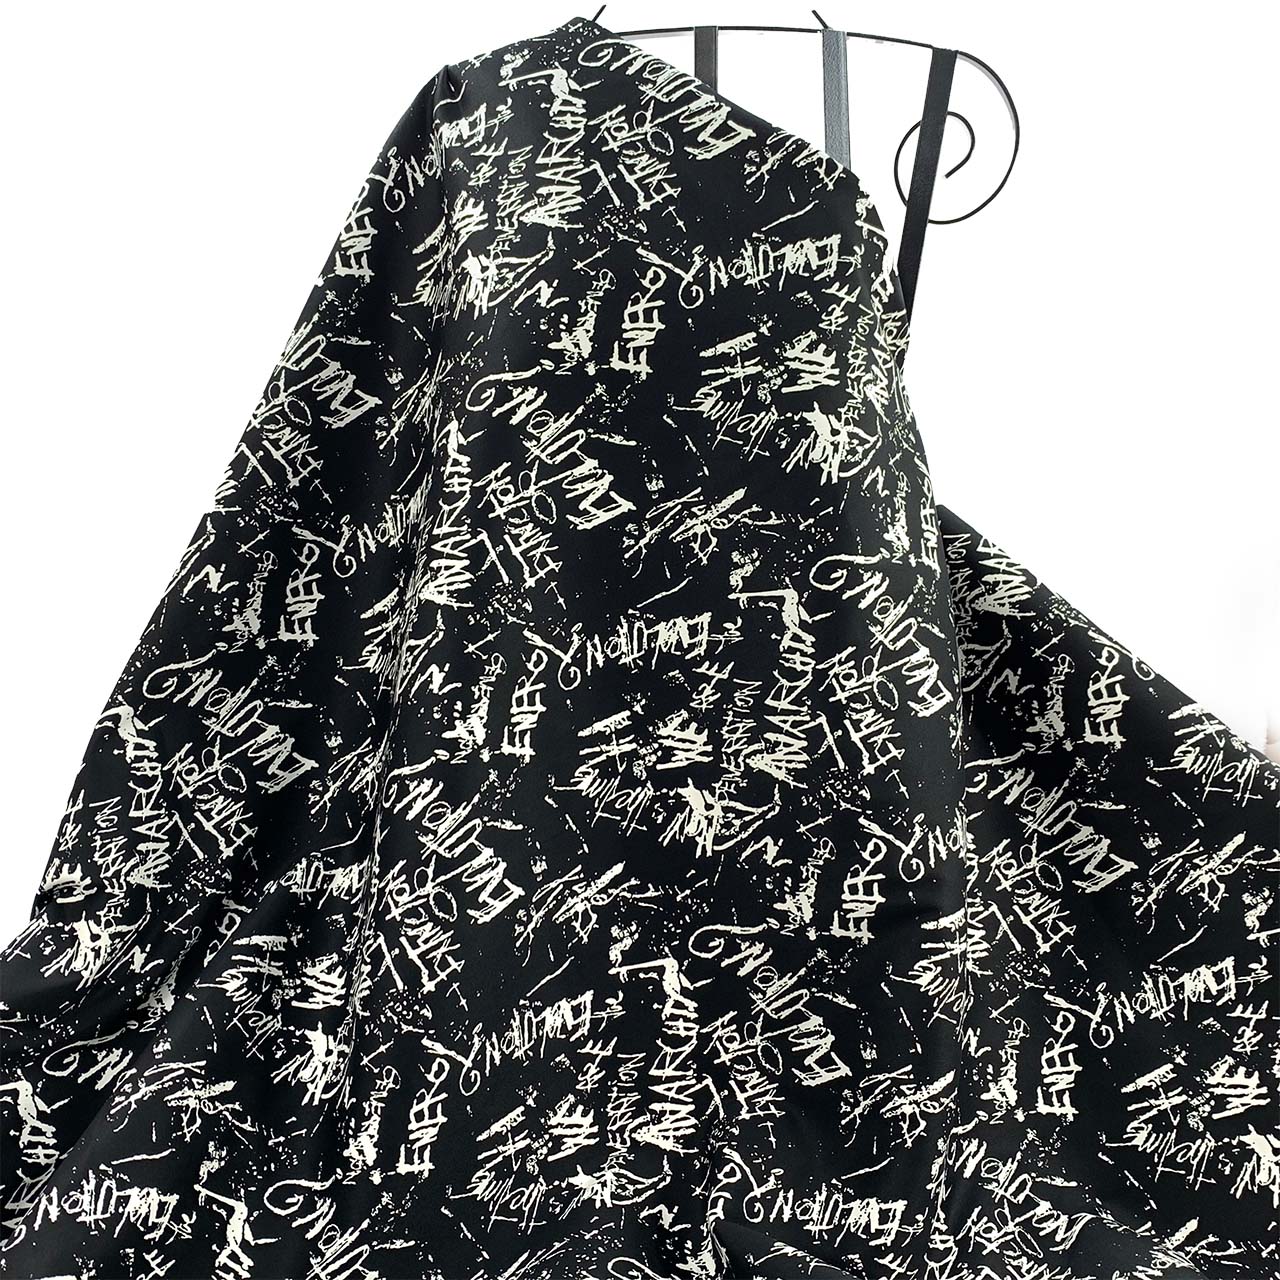 black monochrome white scribble printed fabric cotton sateen - Fabric Collection